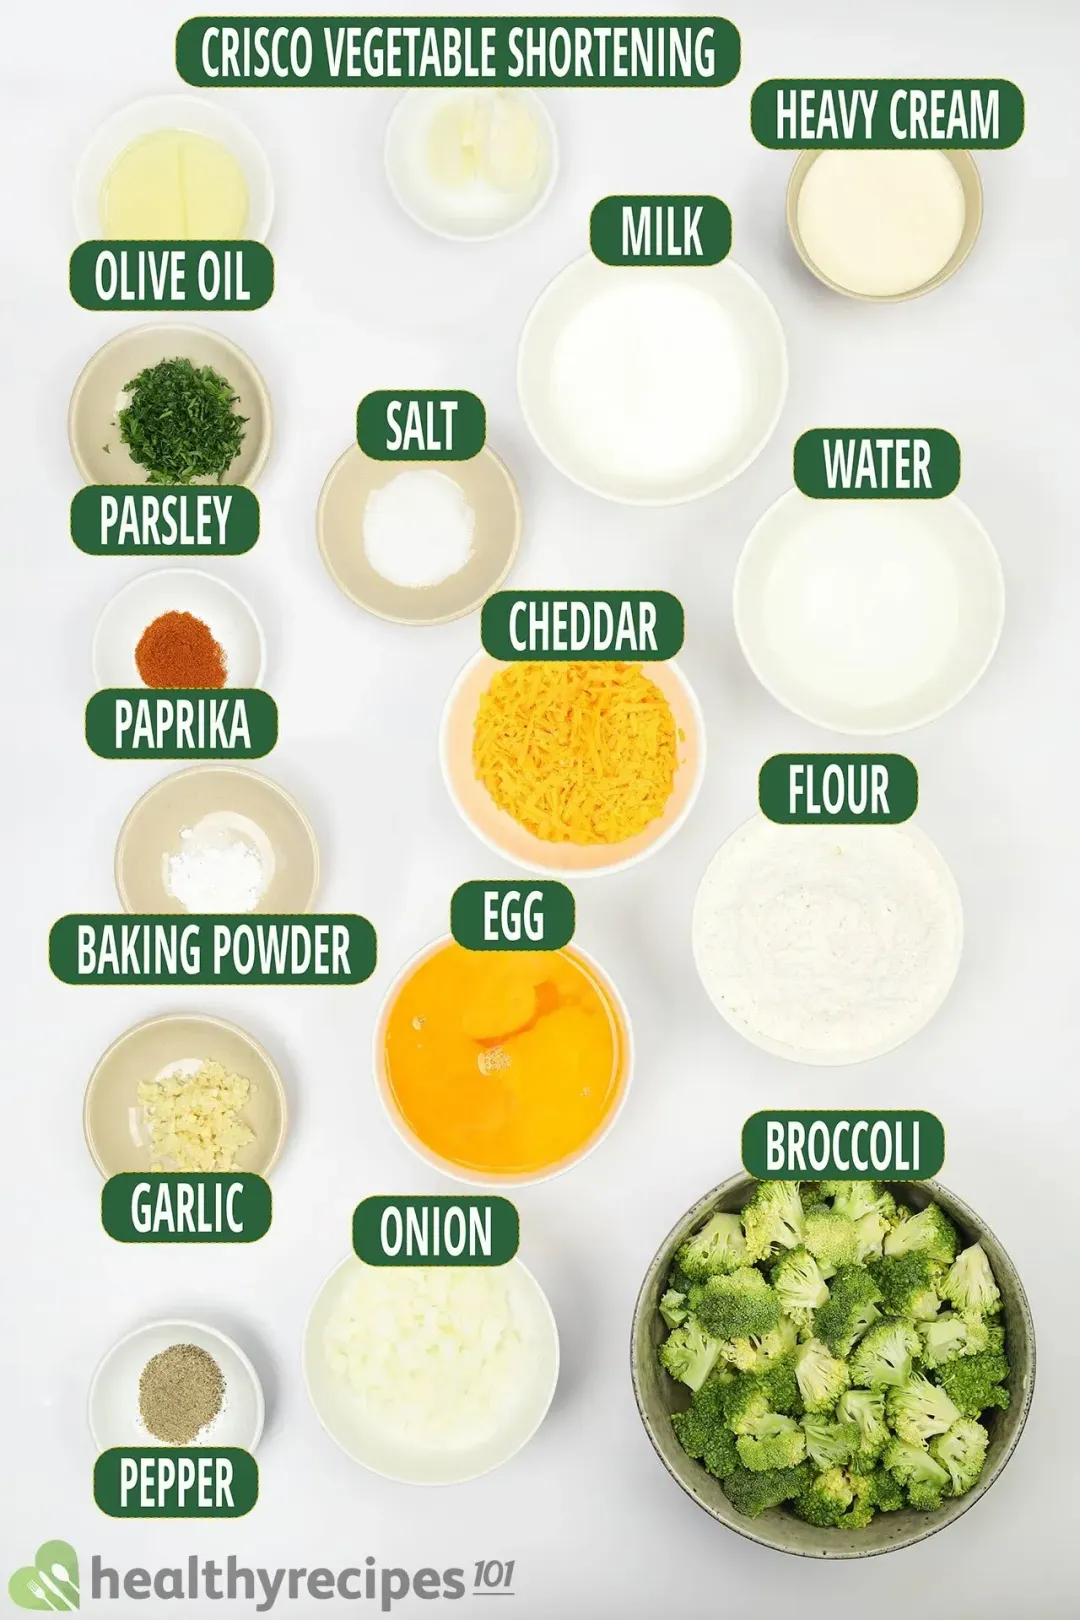 Ingredients for Broccoli Quiche